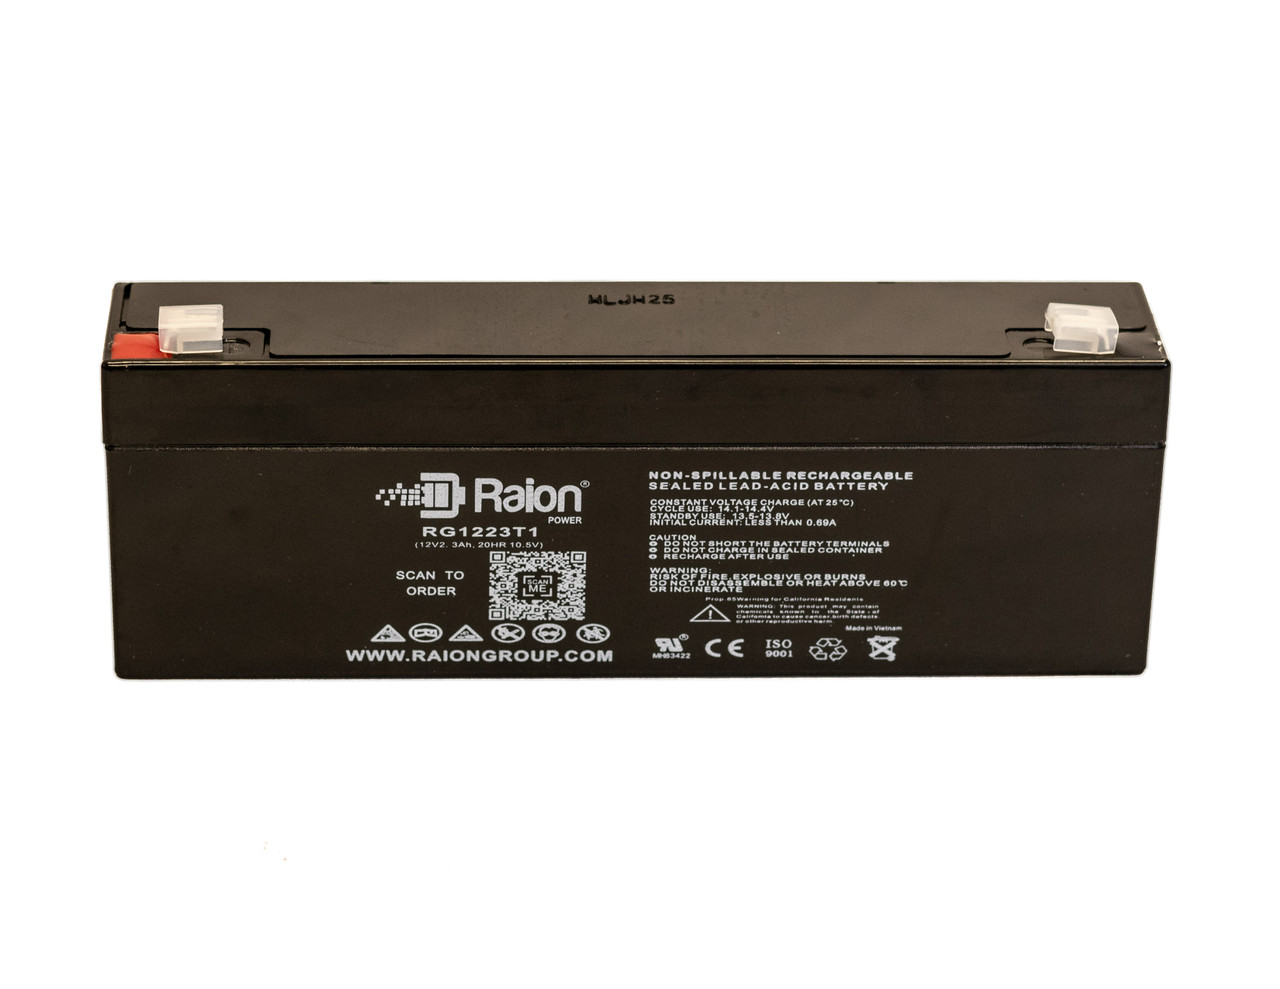 Raion Power 12V 2.3Ah SLA Battery With T1 Terminals For Baxter Healthcare AS5B